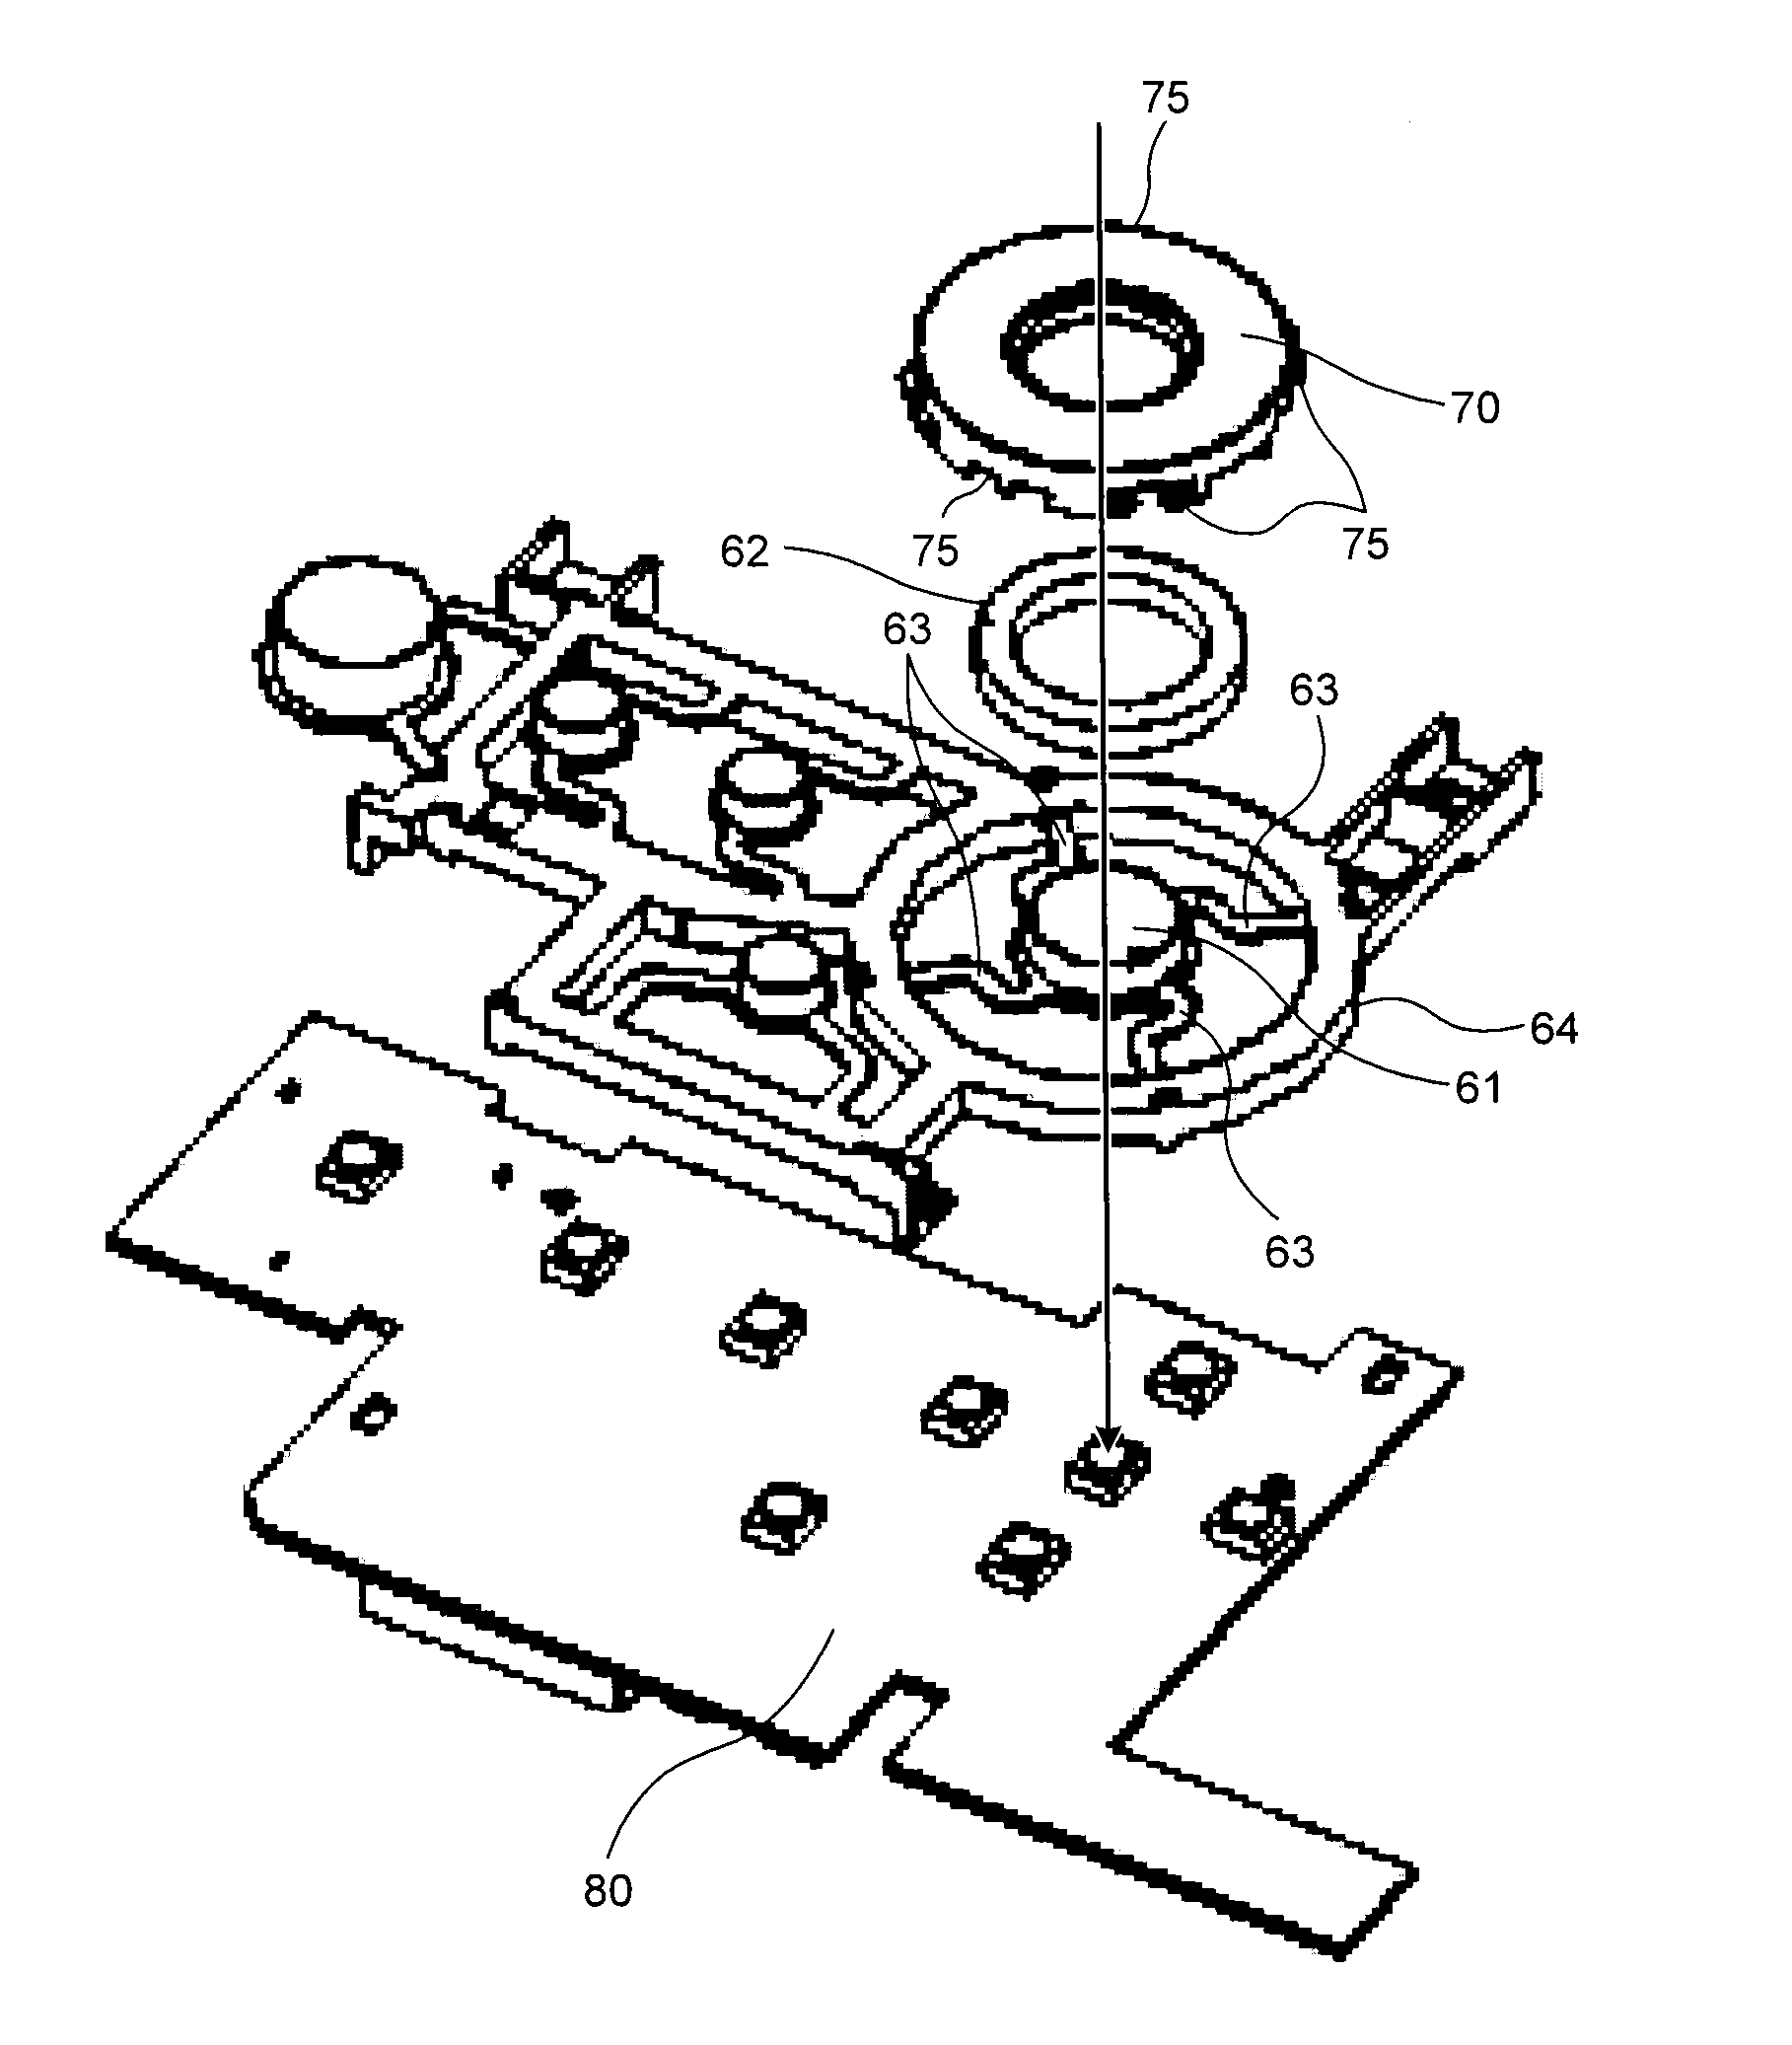 Switch mechanism and electronic device